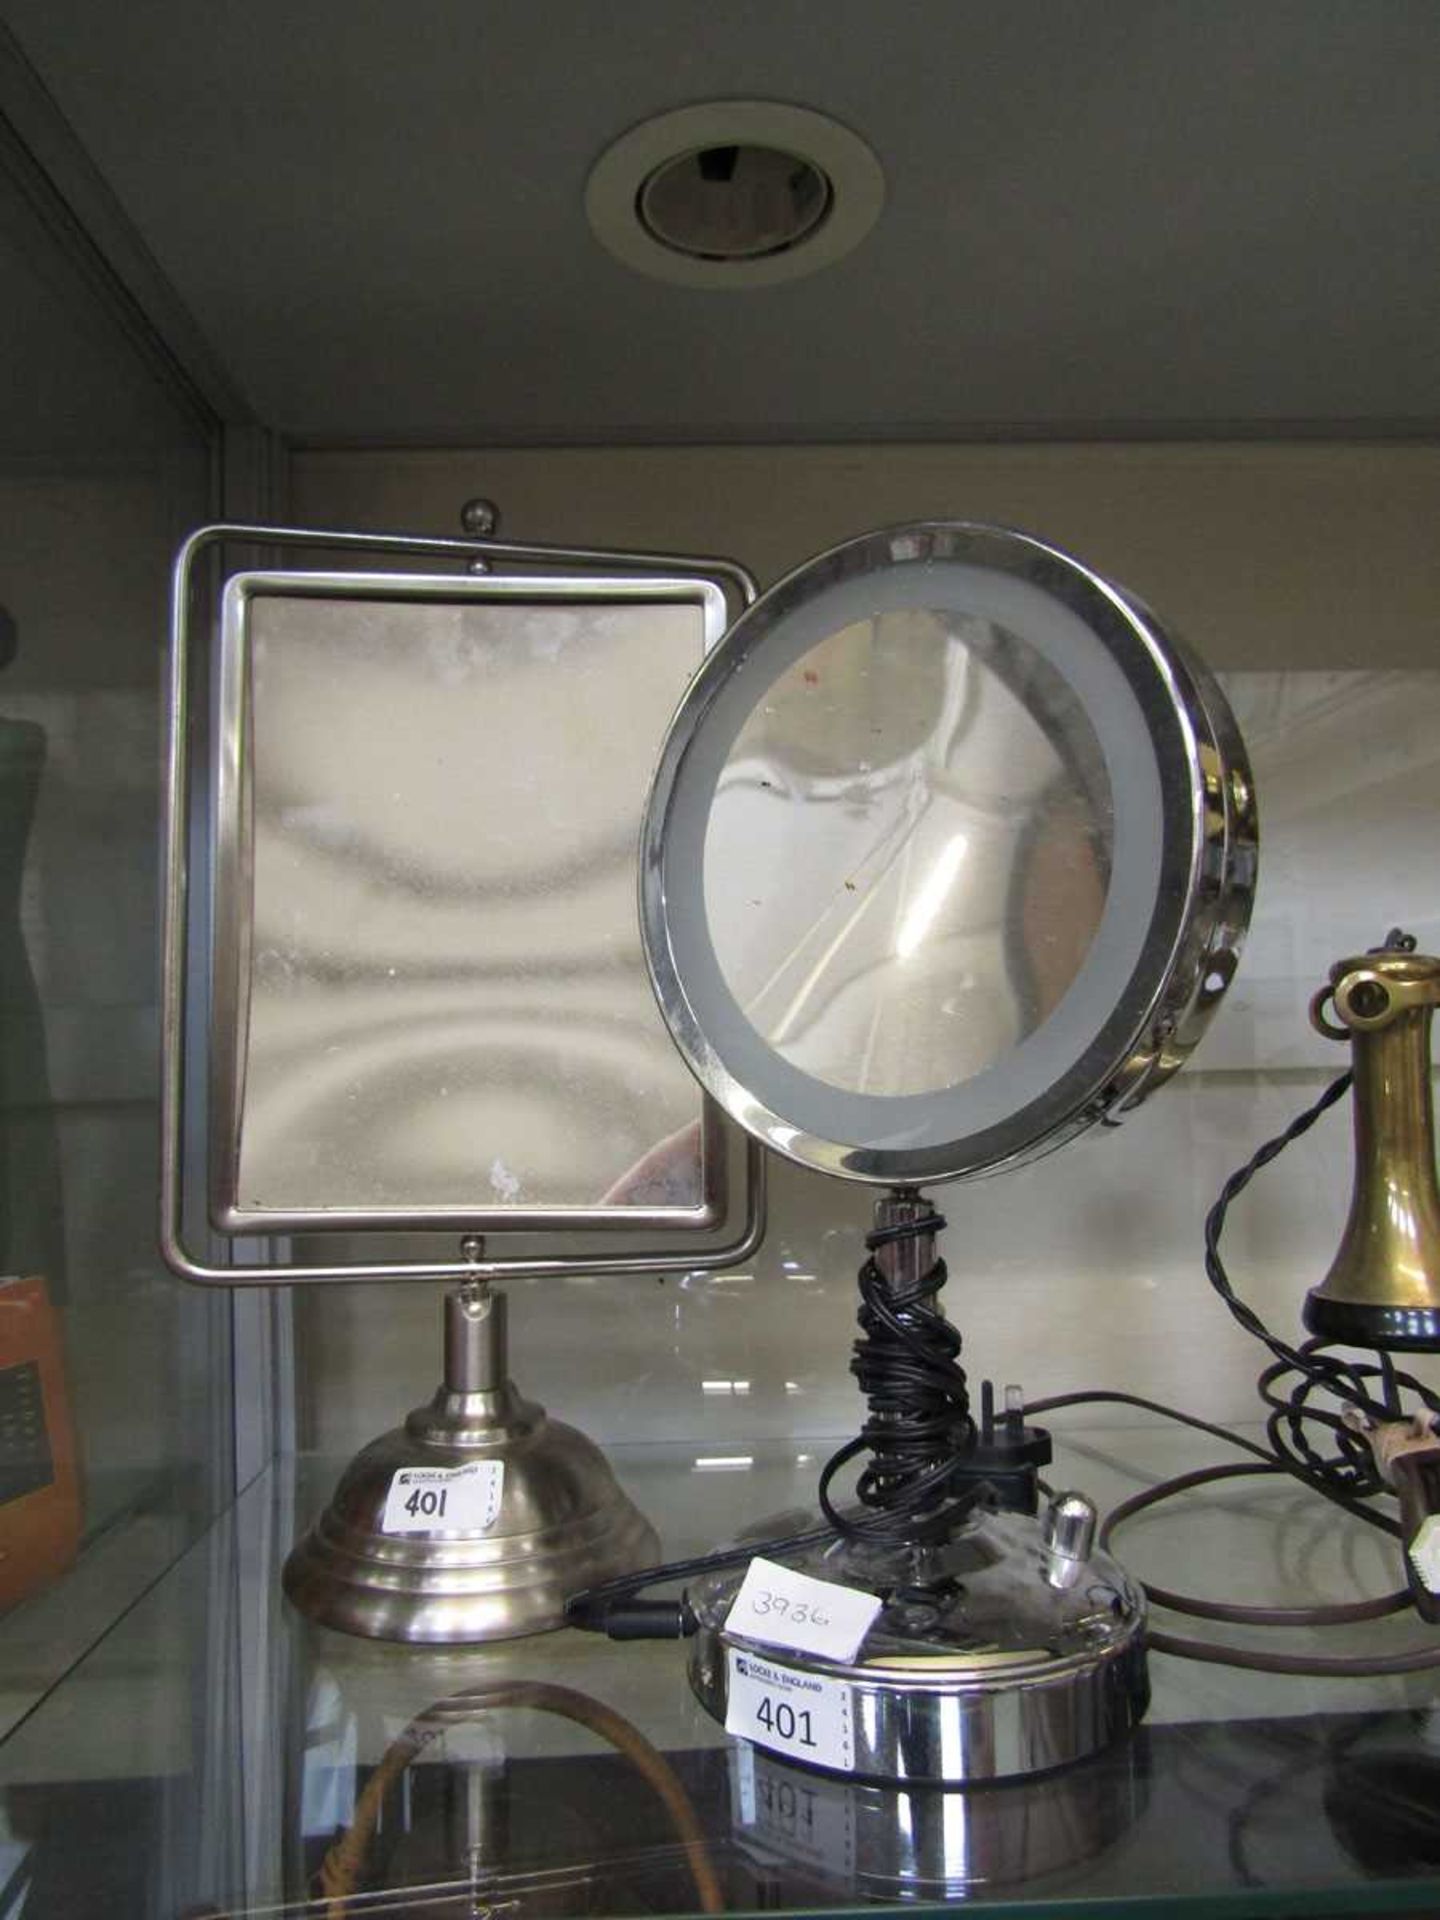 A stainless steel desktop swing mirror along with one other light-up desktop mirror